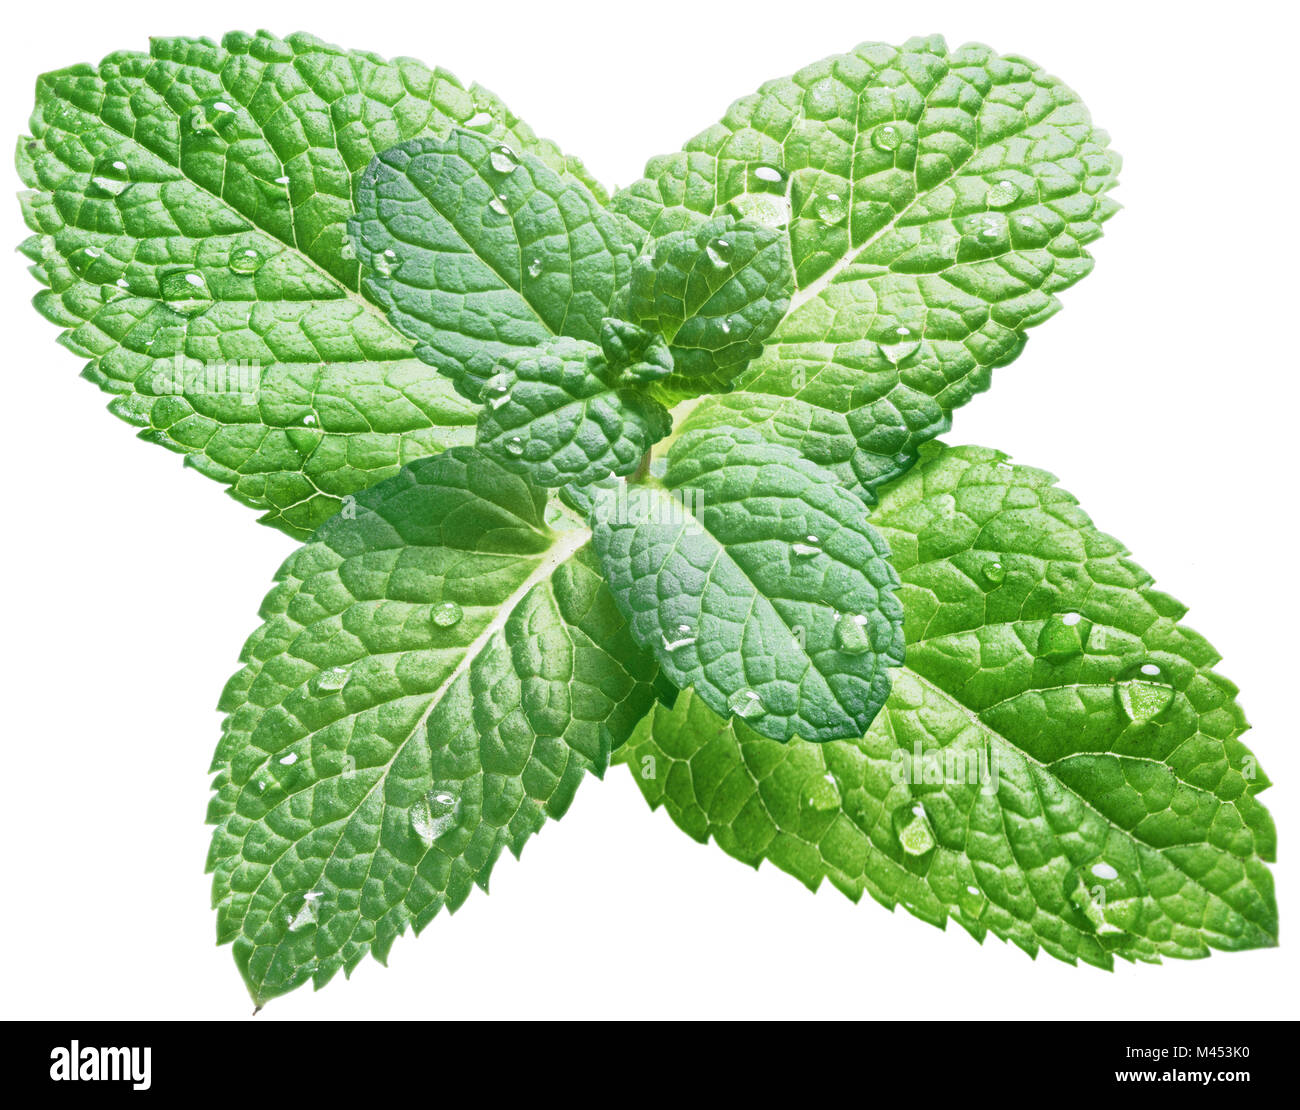 Spearmint or mint leaves with water drops on white background. Top view. Stock Photo